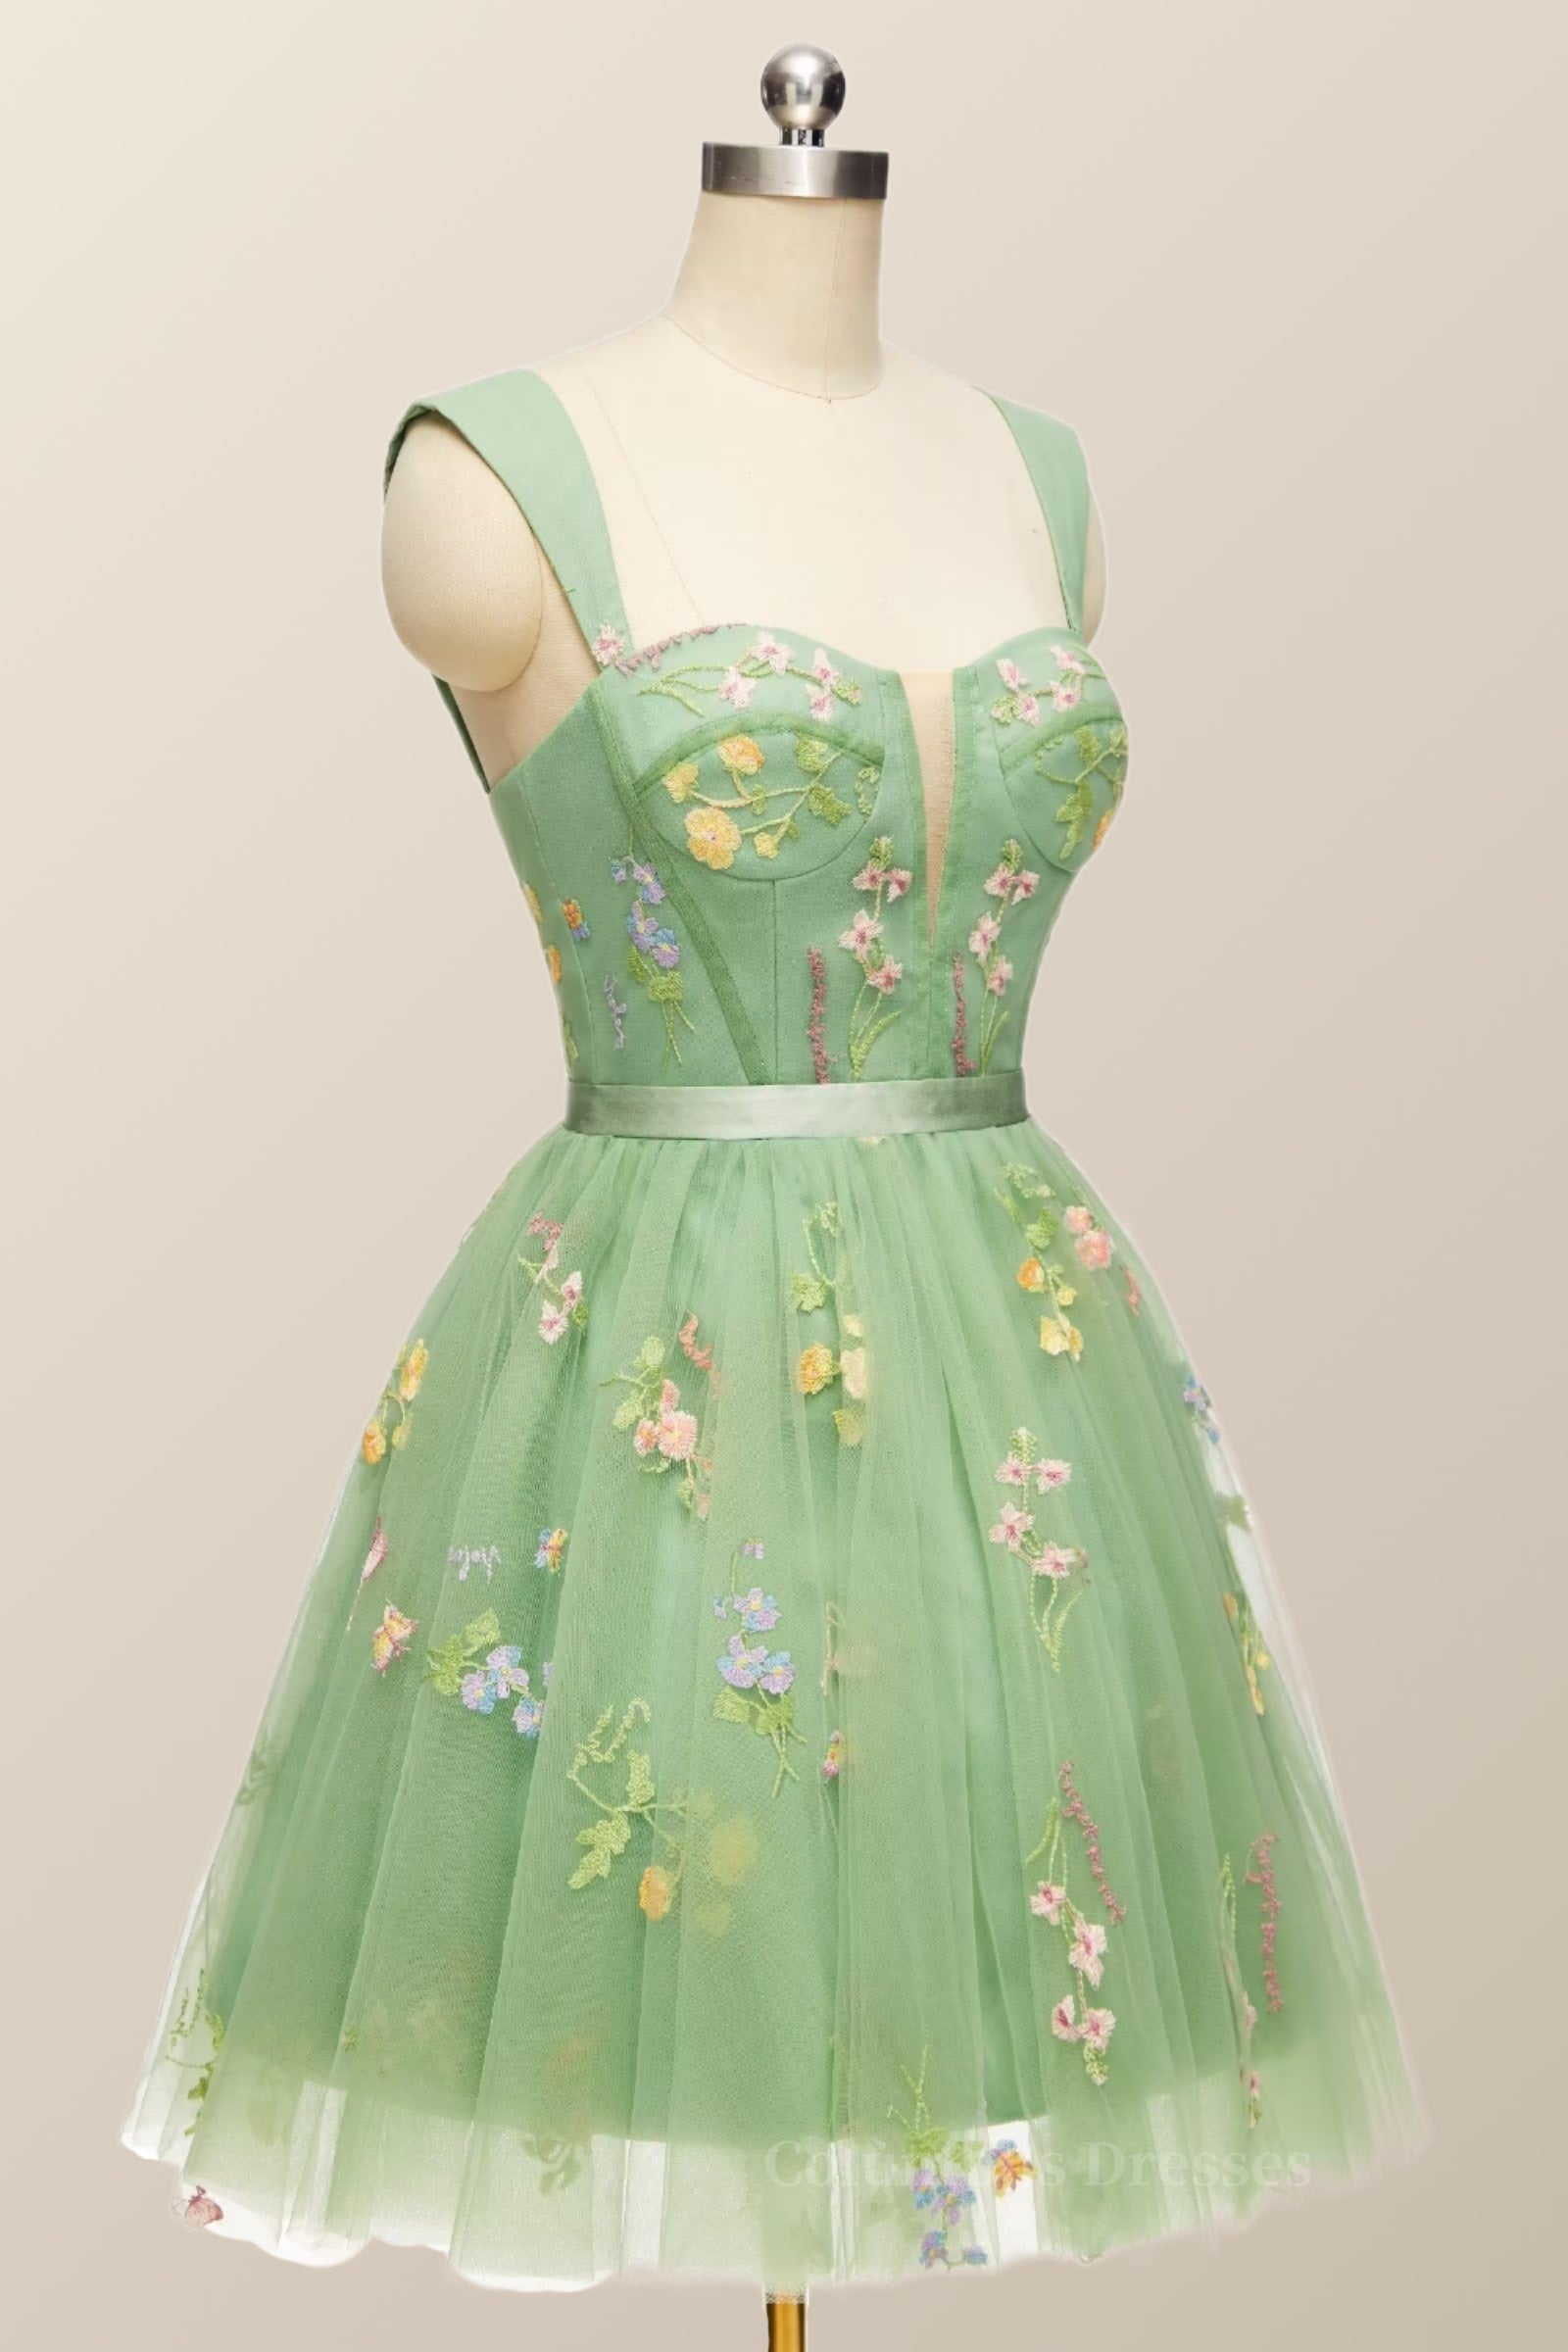 Prom Dresses For Curvy Figure, Green Floral A-line Short Princess Dress with Square Neck